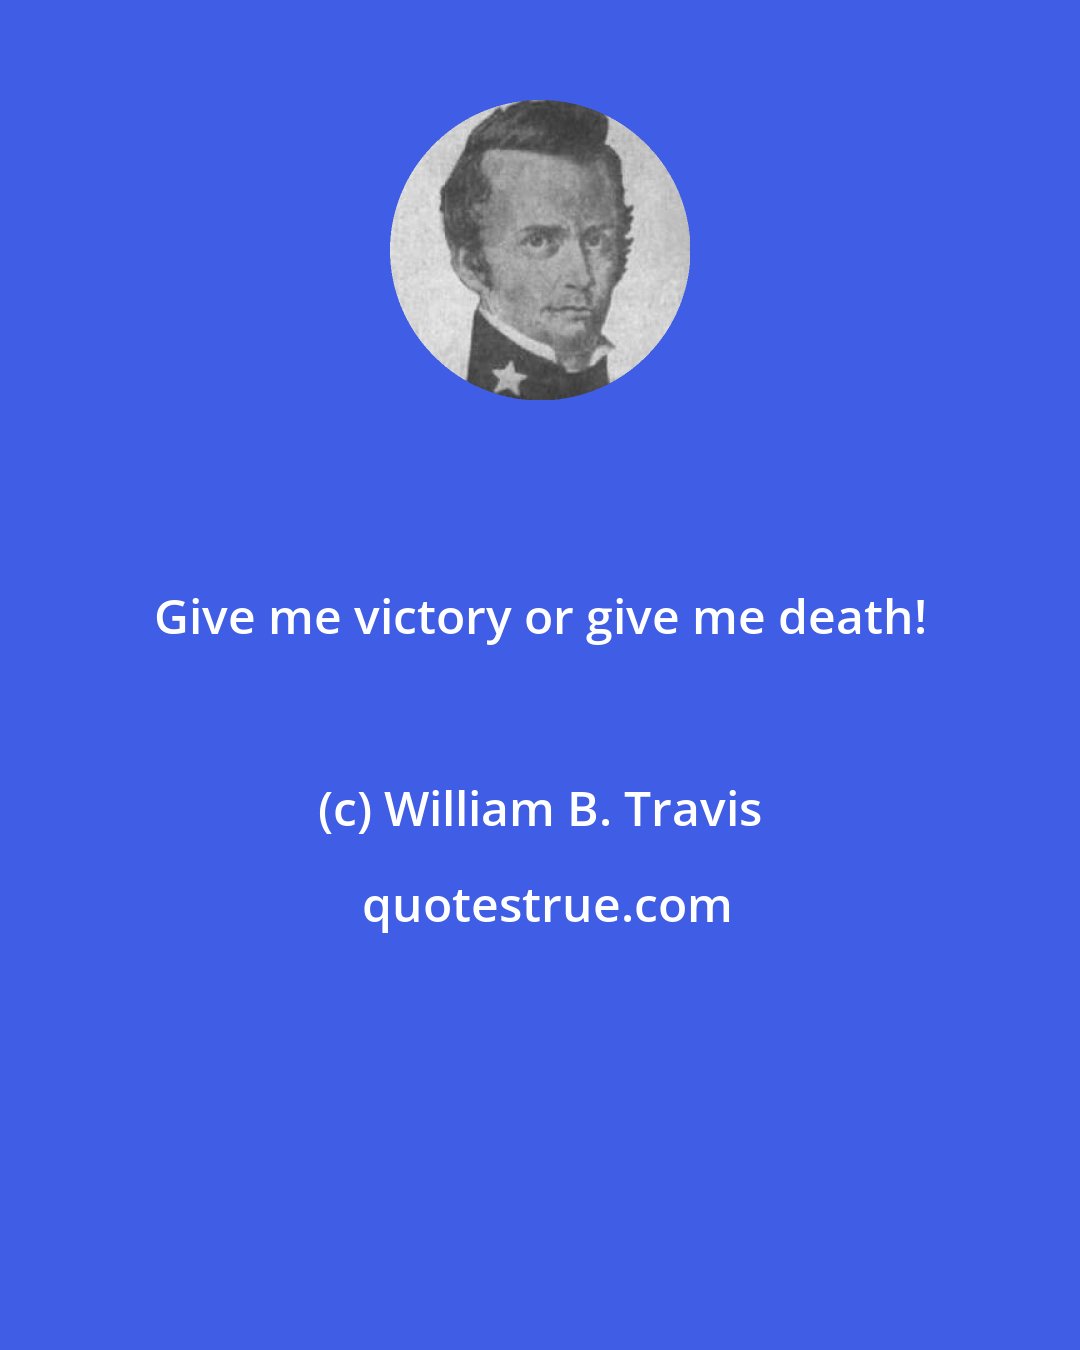 William B. Travis: Give me victory or give me death!